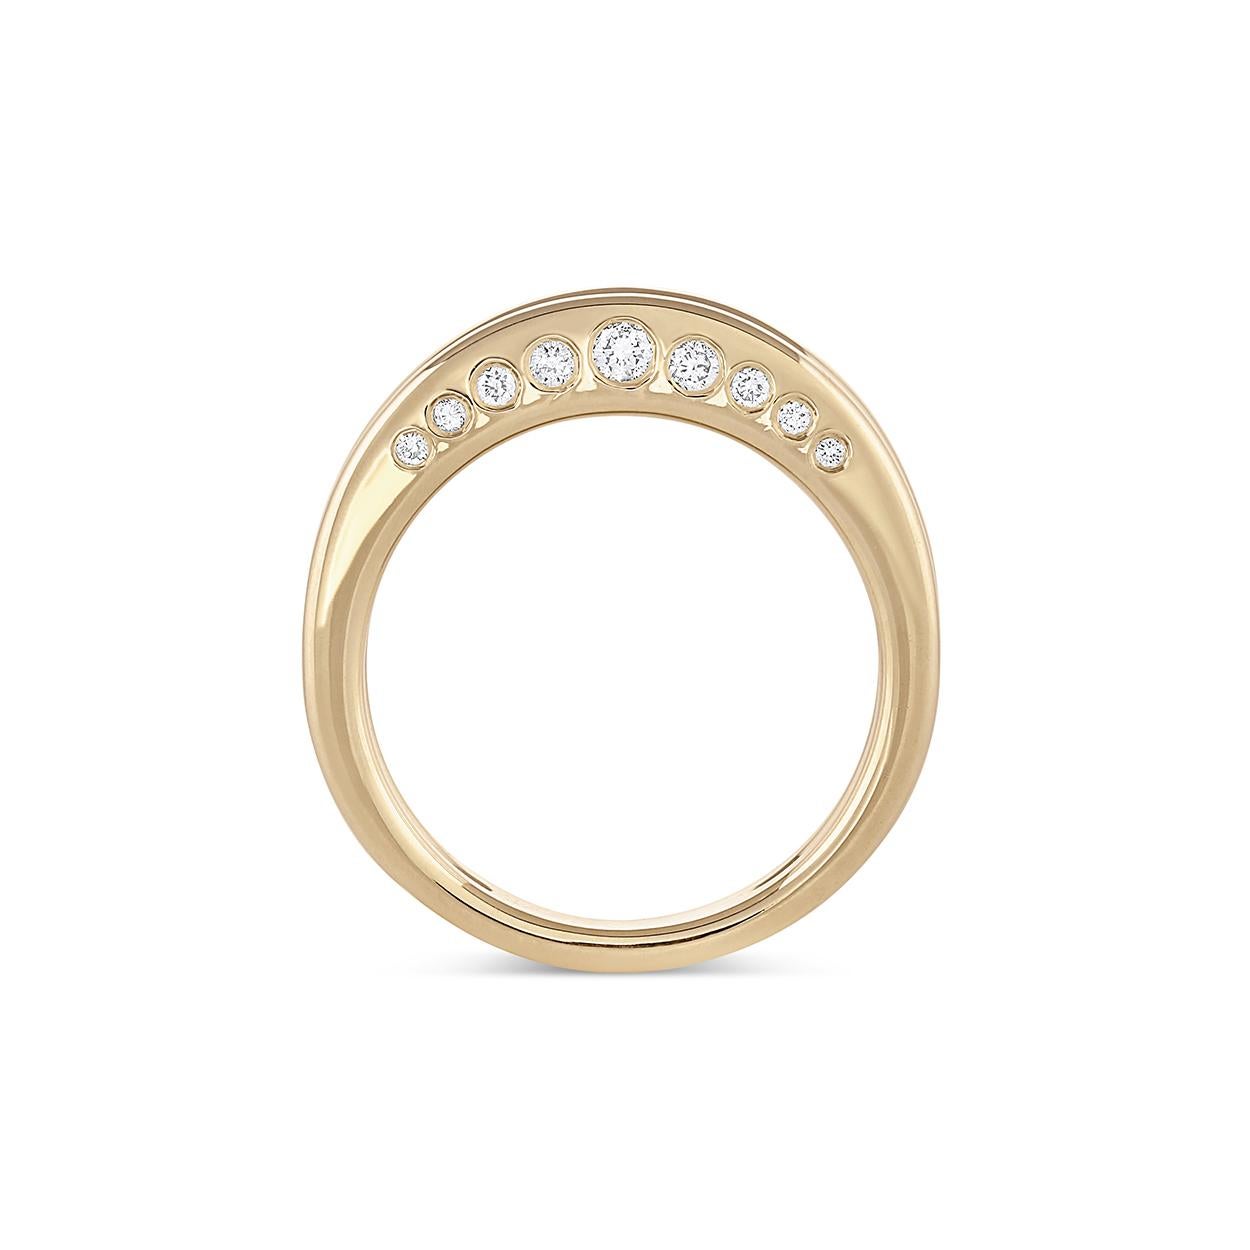 For Sale:  EMBLM Twin Crescent Ring – 14K Yellow Gold, Bezel Set White Diamonds 5